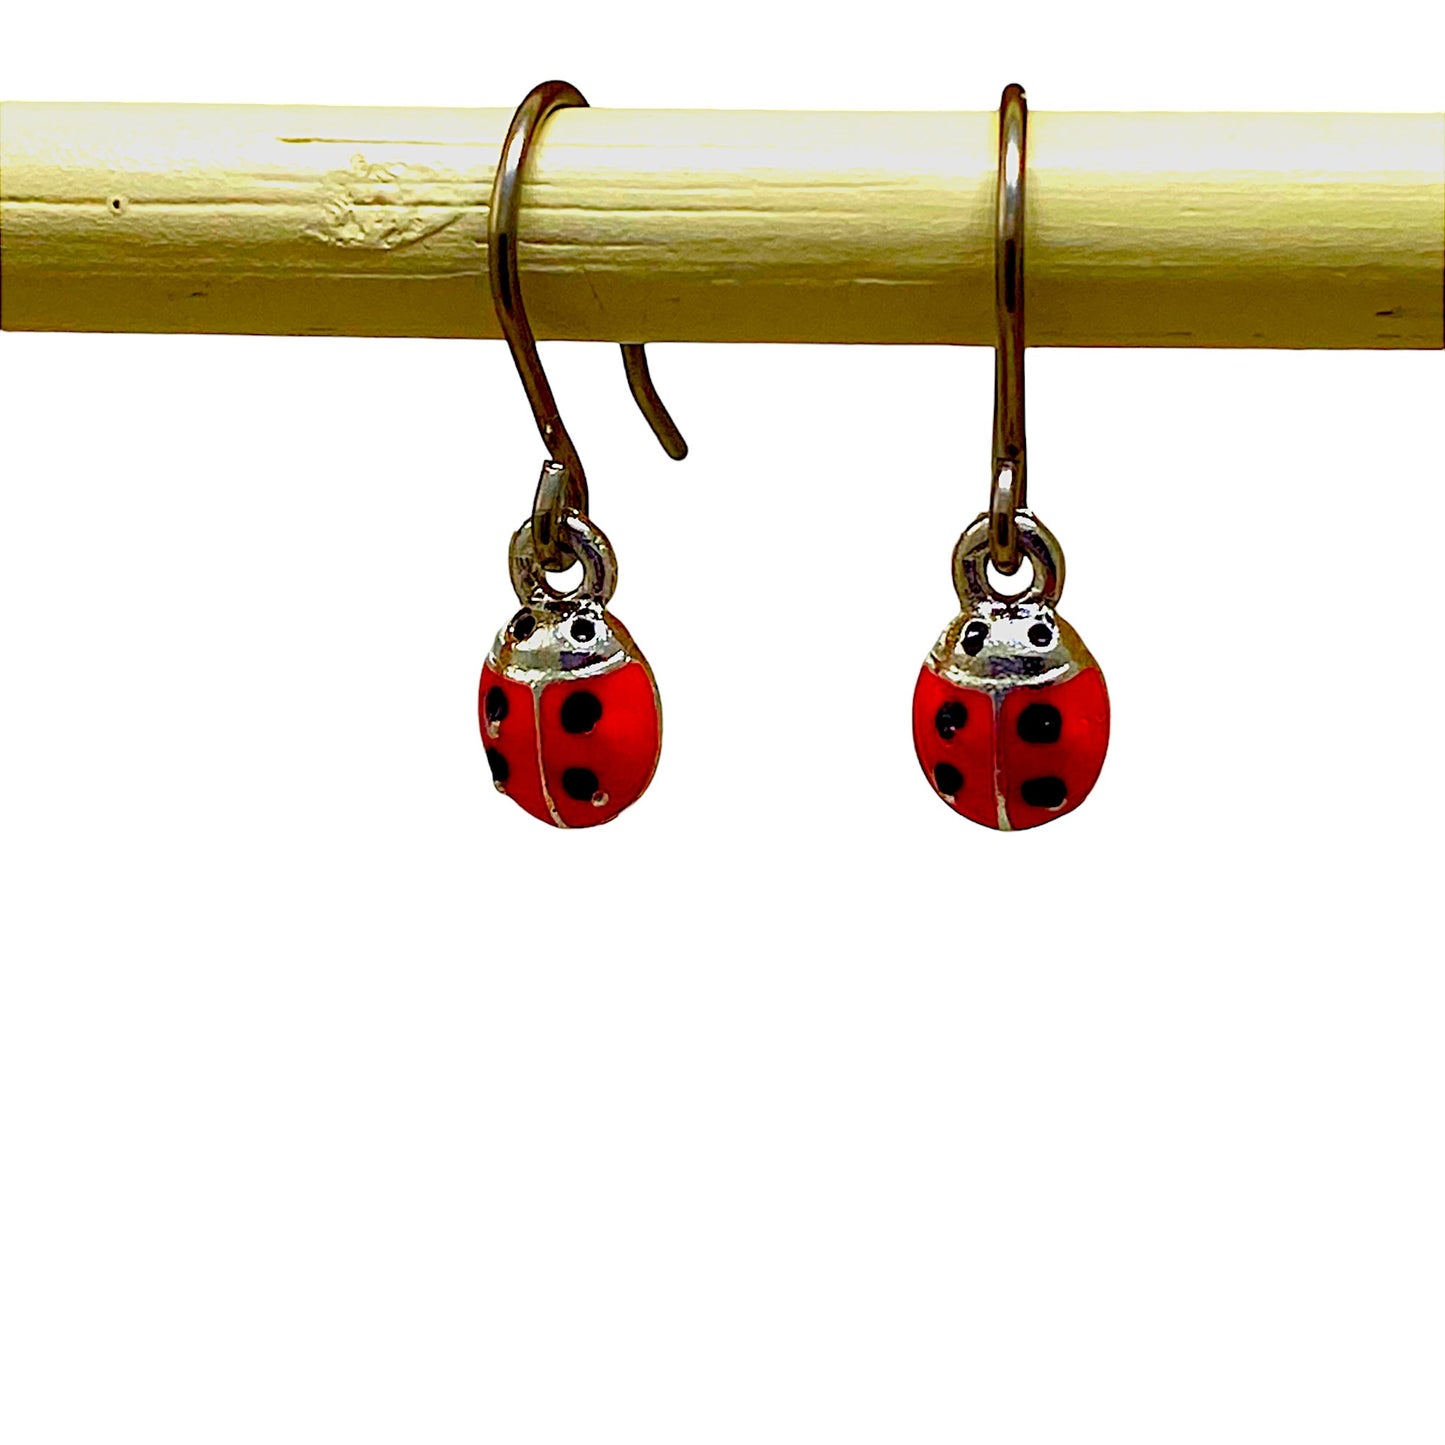 Ladybug earrings with a titanium hook on a white background